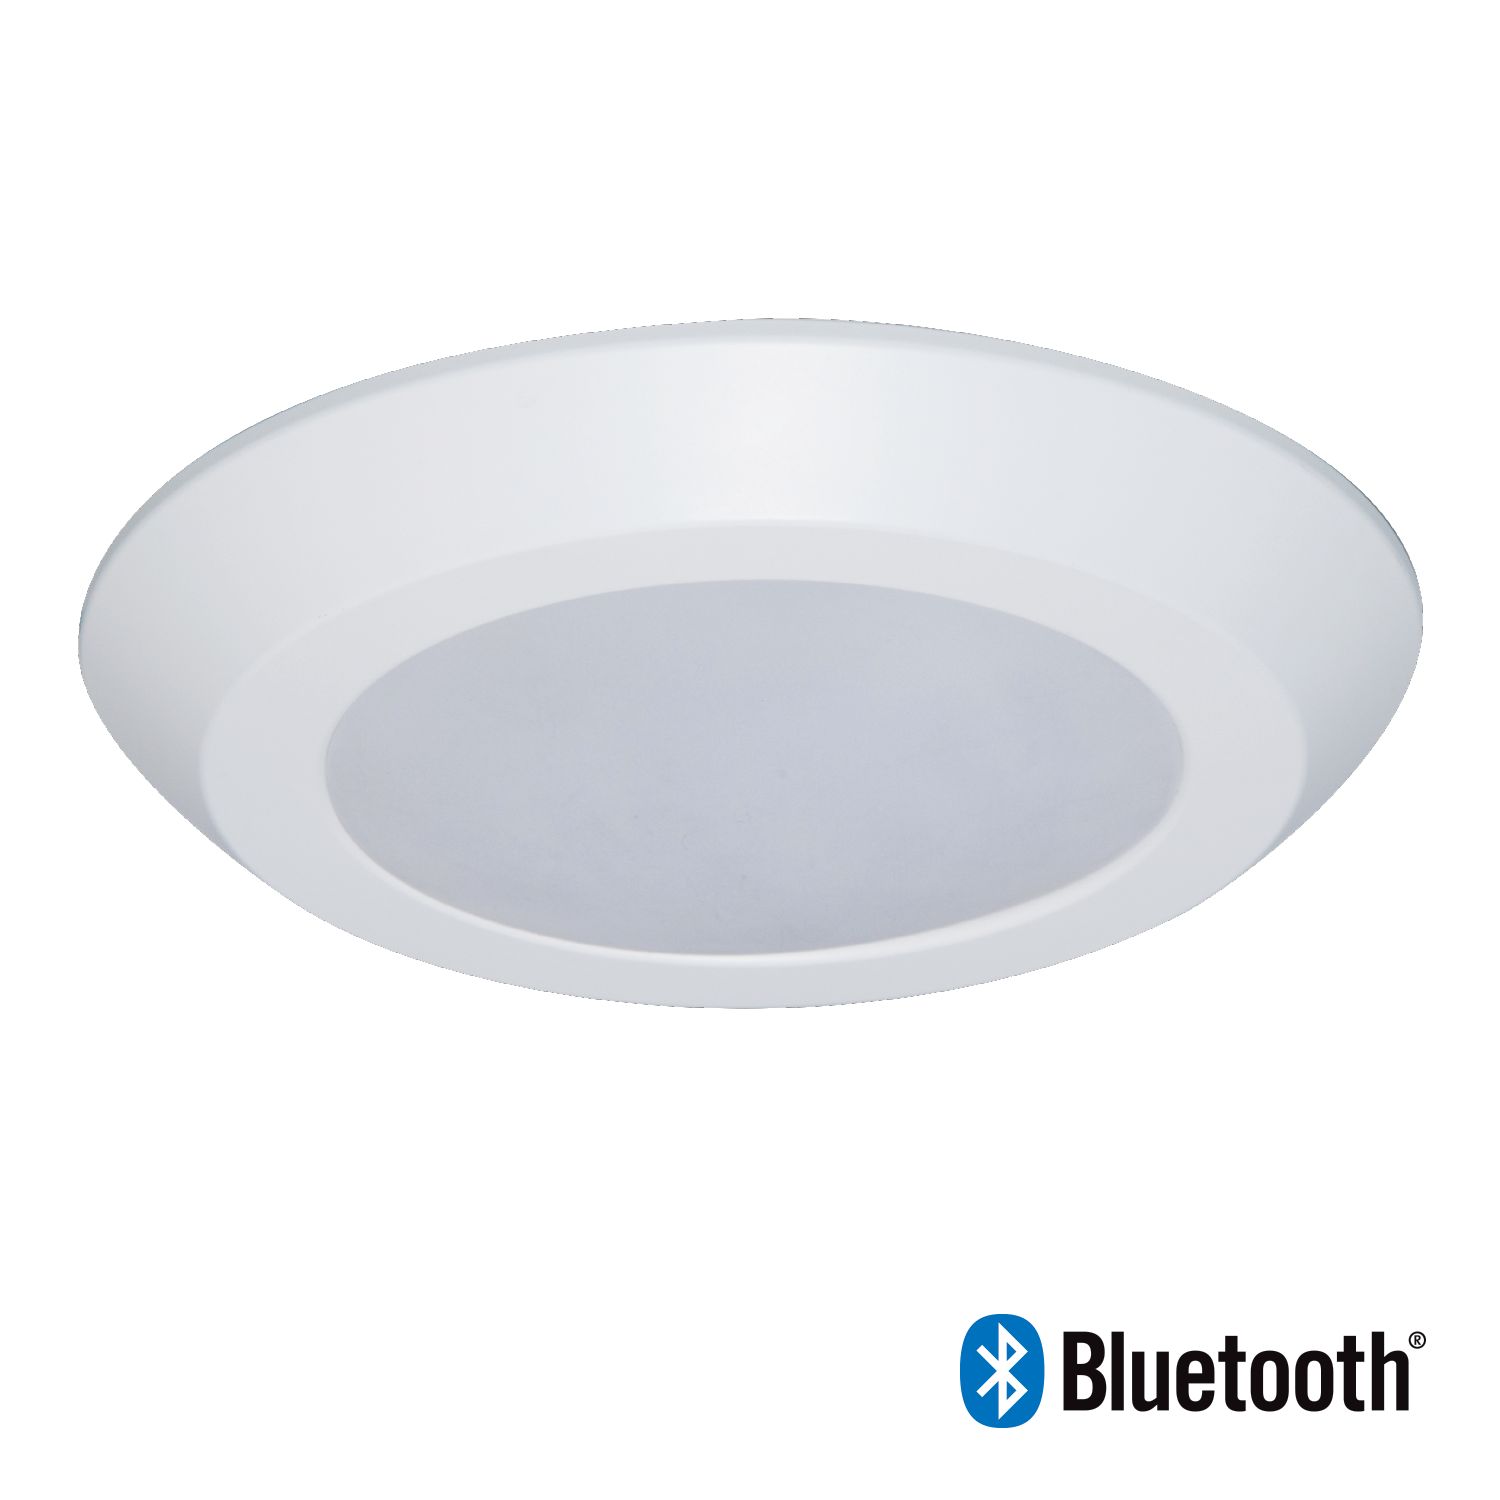 Halo Home Smart Surface Mount Downlight, Halo Light Fixtures Home Page